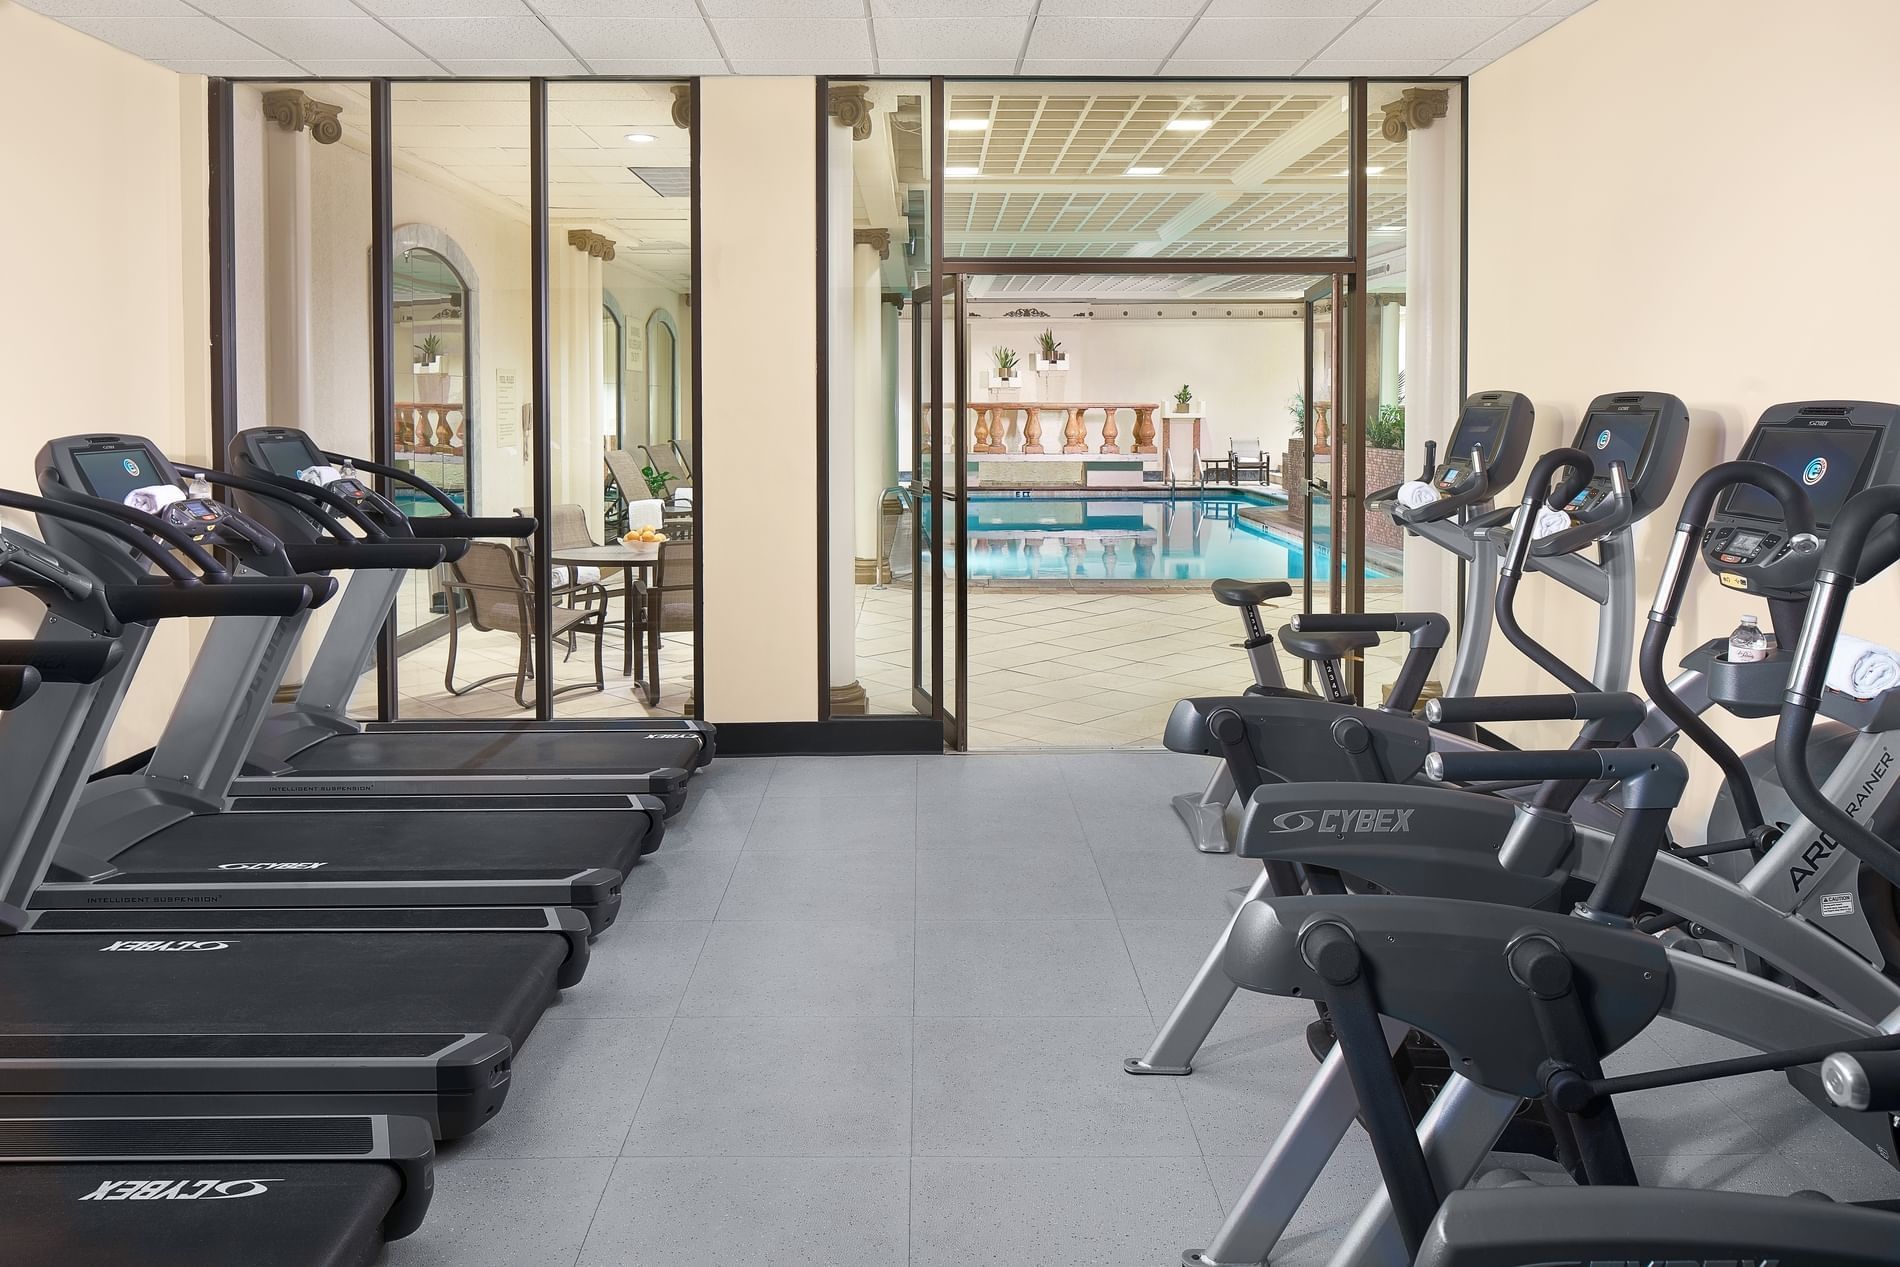 Treadmills in the Peabody athletic club and pool